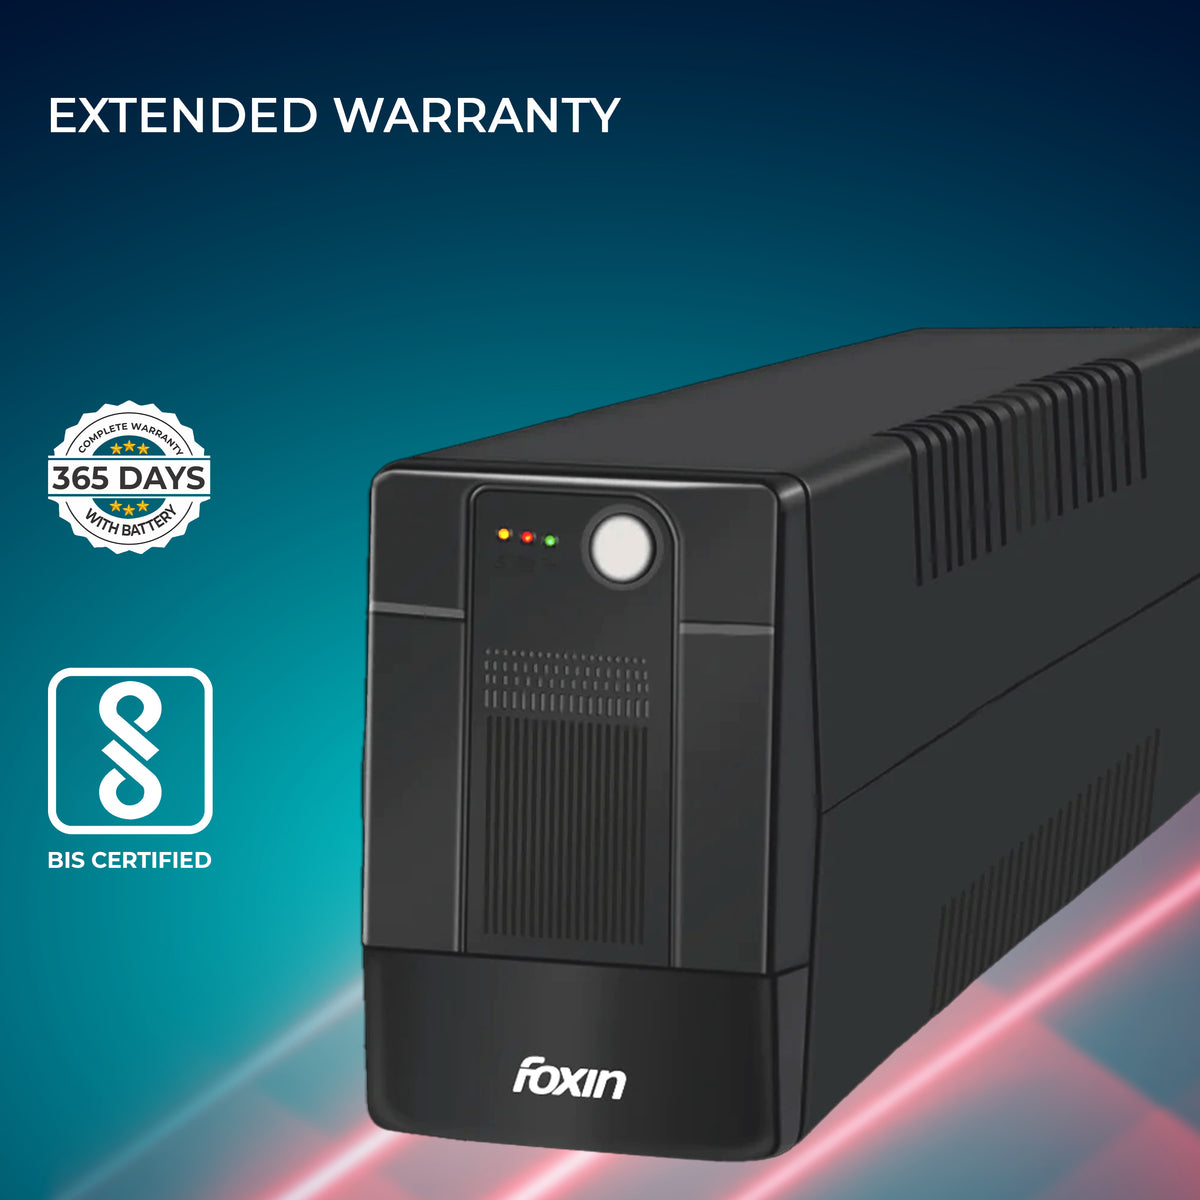 Foxin FPS-755/600VA Uninterrupted Power Supply (UPS), with LED Indicator &amp; Audible Alarm, Battery Overload Protection, UPS for PC, Desktop Computers, Laptops, Gaming PC, Wifi Routers | BIS Approved |  2 Years Warranty